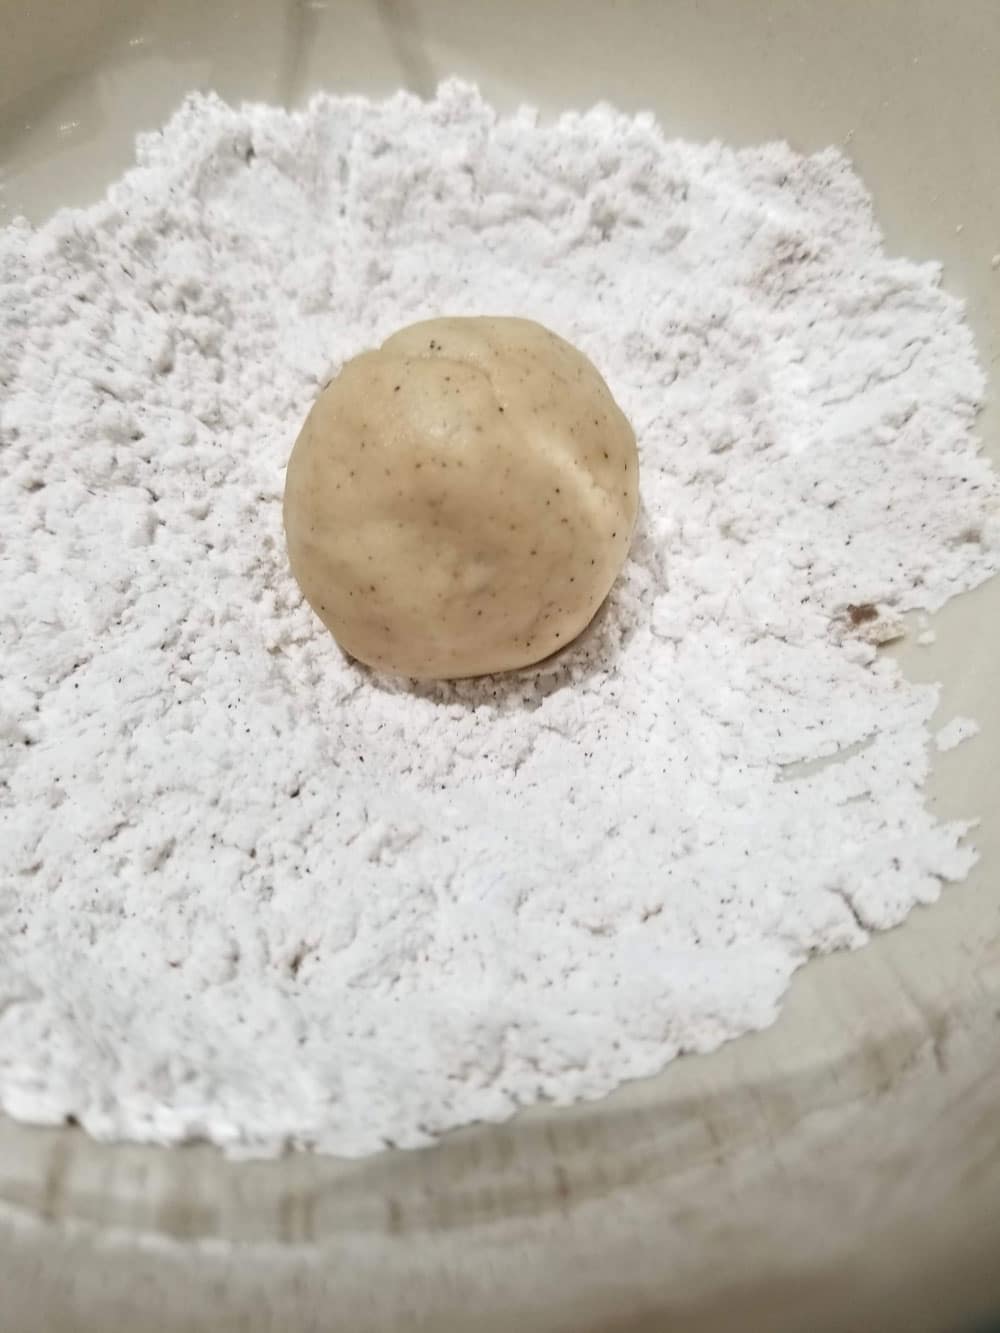 cookie dough ball in powdered sugar mix